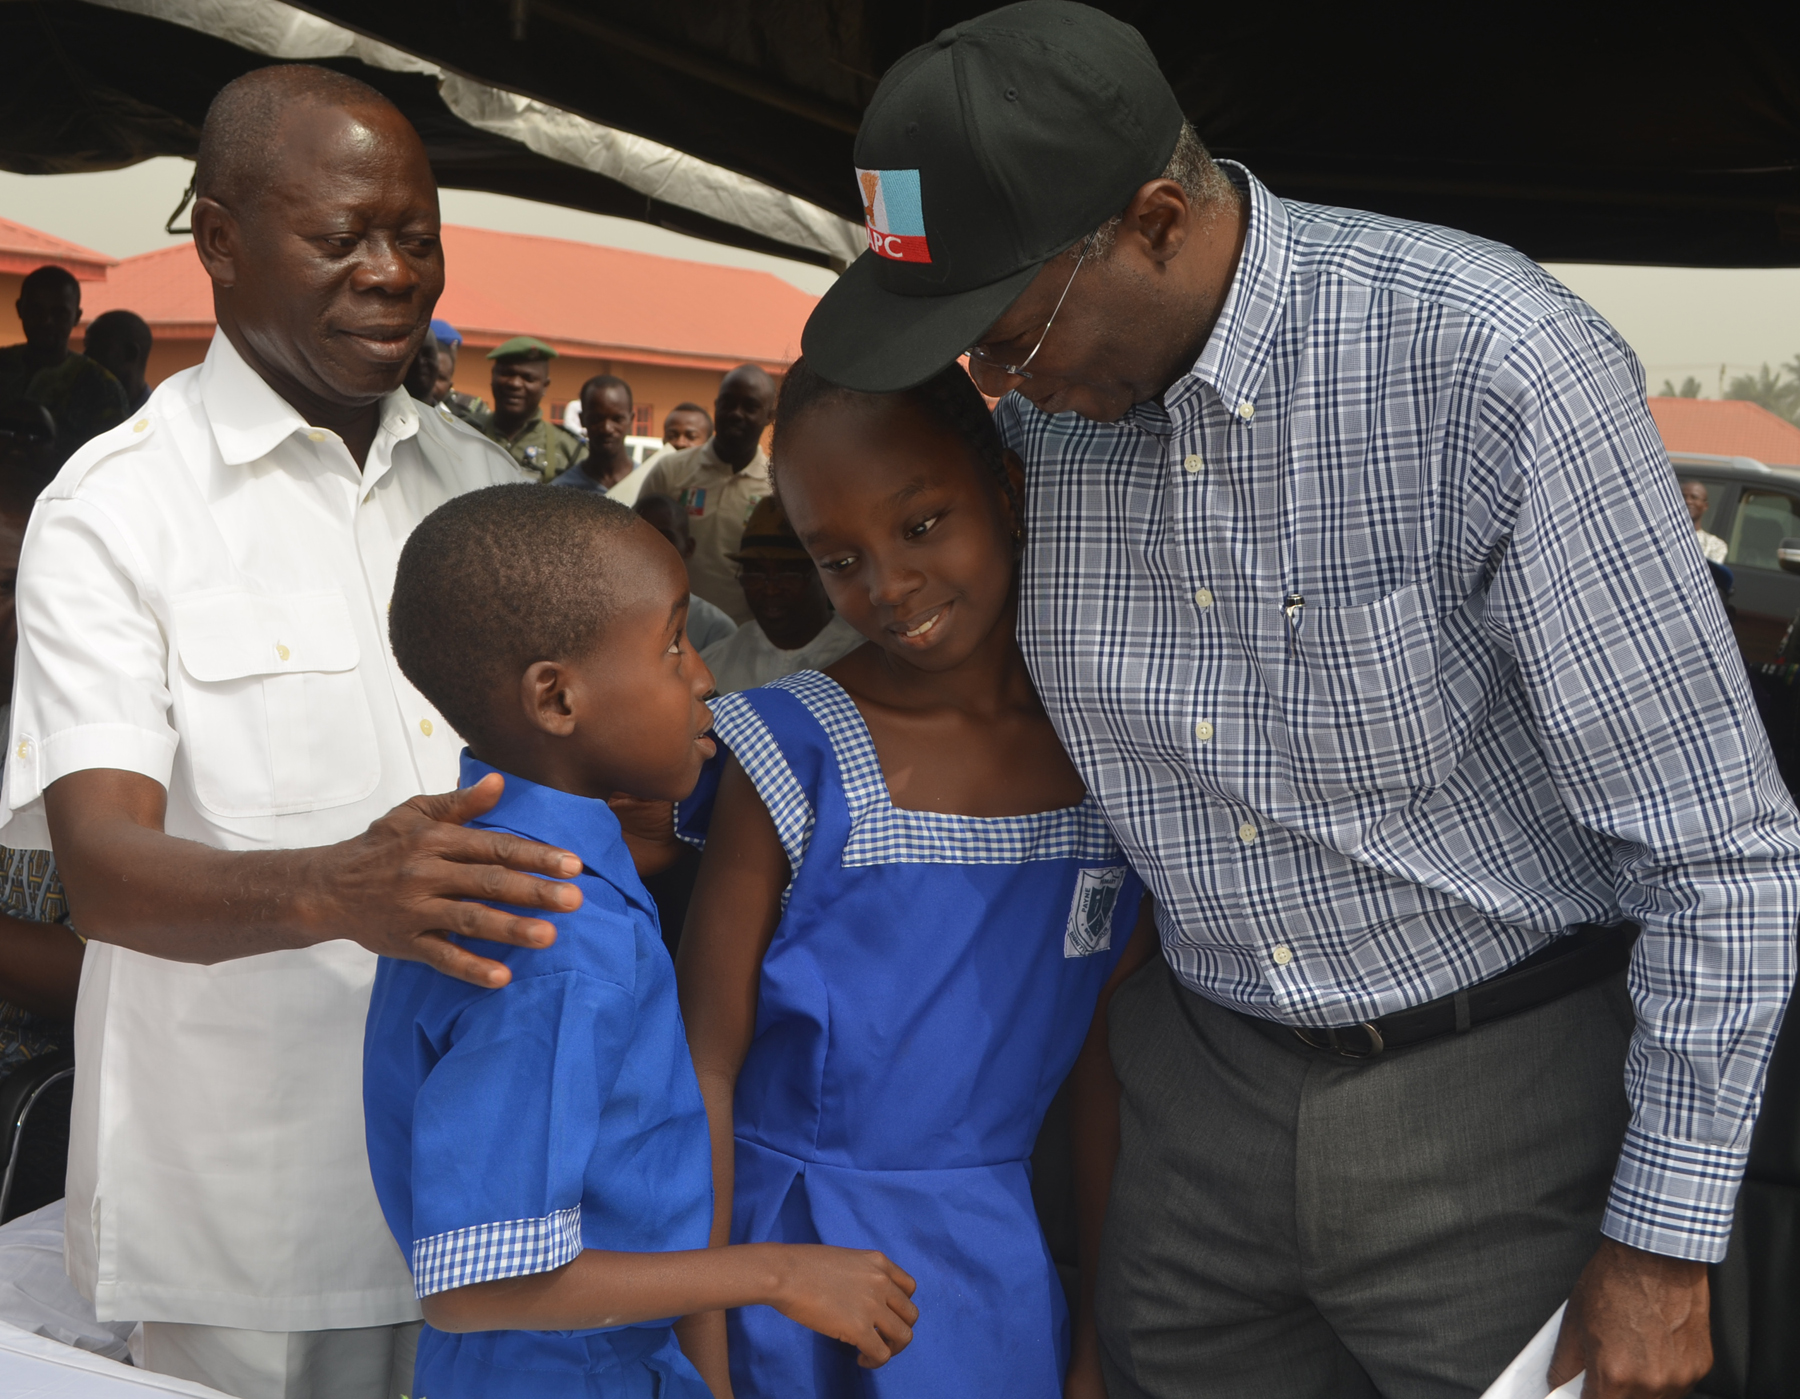 From left: Governor Babtunde Fashola, SAN, of Lagos State chats with Christabel Aluge and Ebenezer Ogiozee, Primary Six Pupils of Payne Primary School, Benin City, with them is Governor Adams Oshiomhole of Edo State at the commissioning of the rebuilt 33-classroom Payne Primary School, Benin City, Friday. Edo Govt House Photo